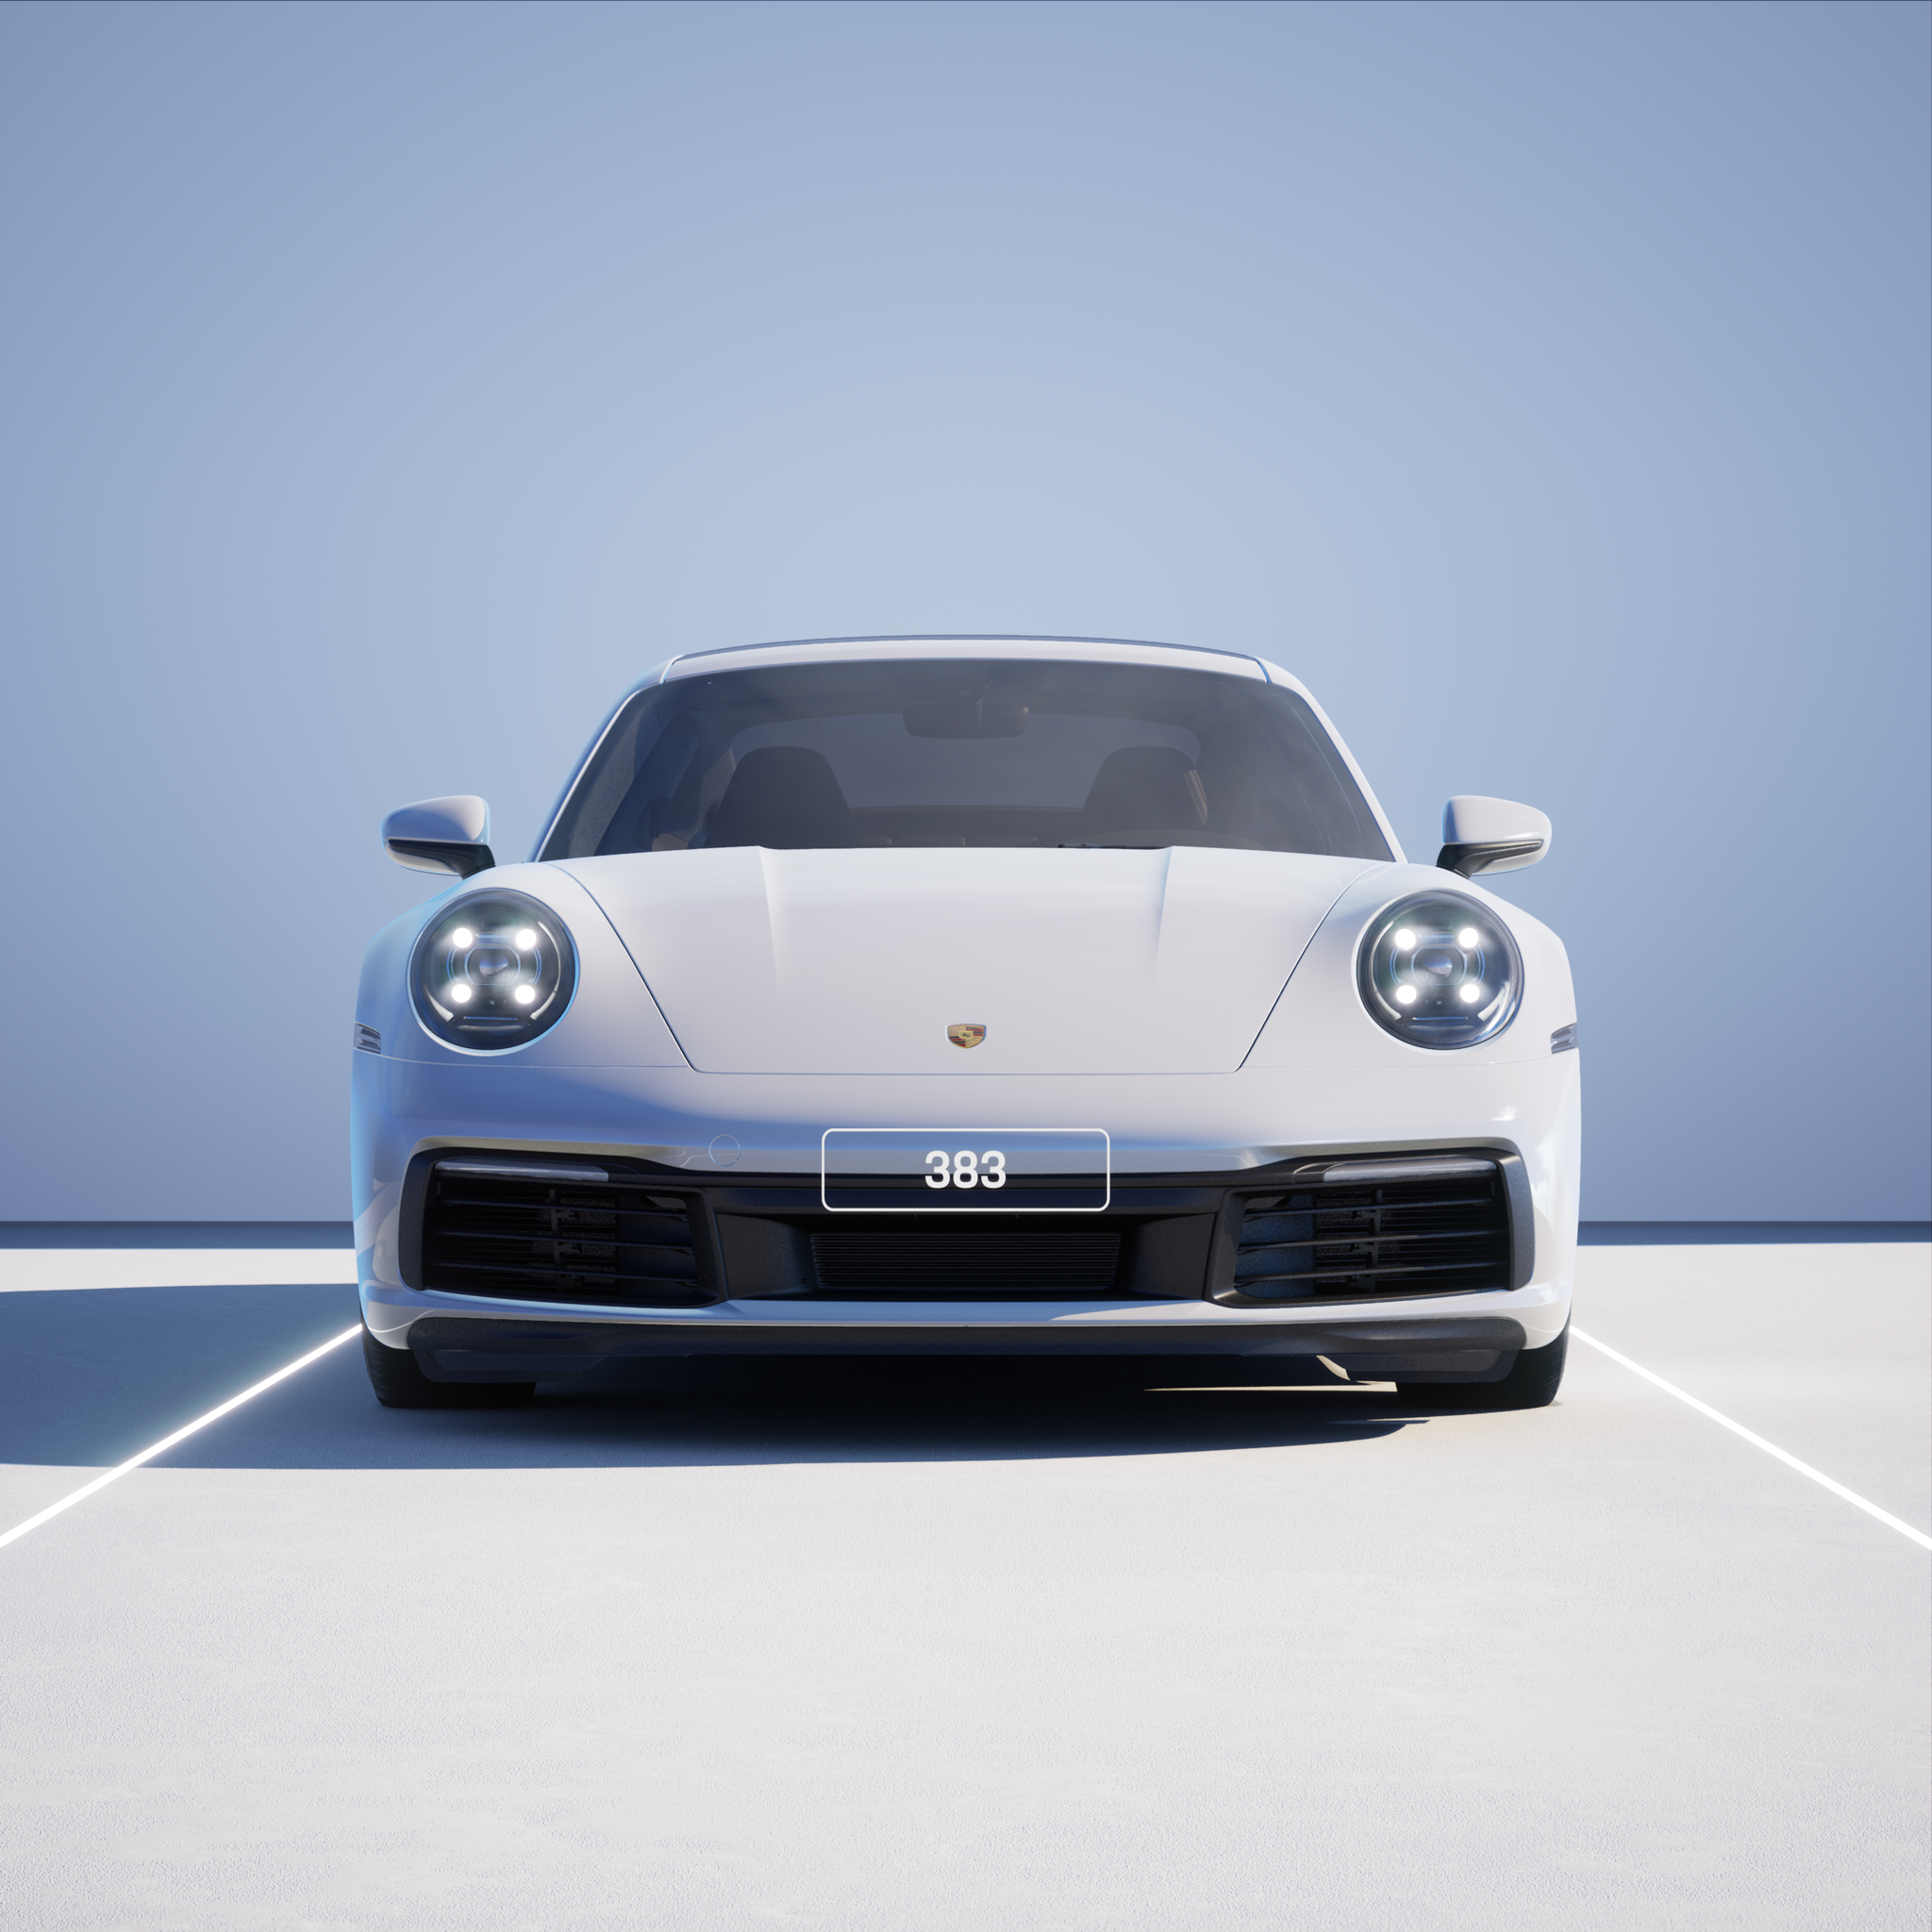 The PORSCHΞ 911 383 image in phase